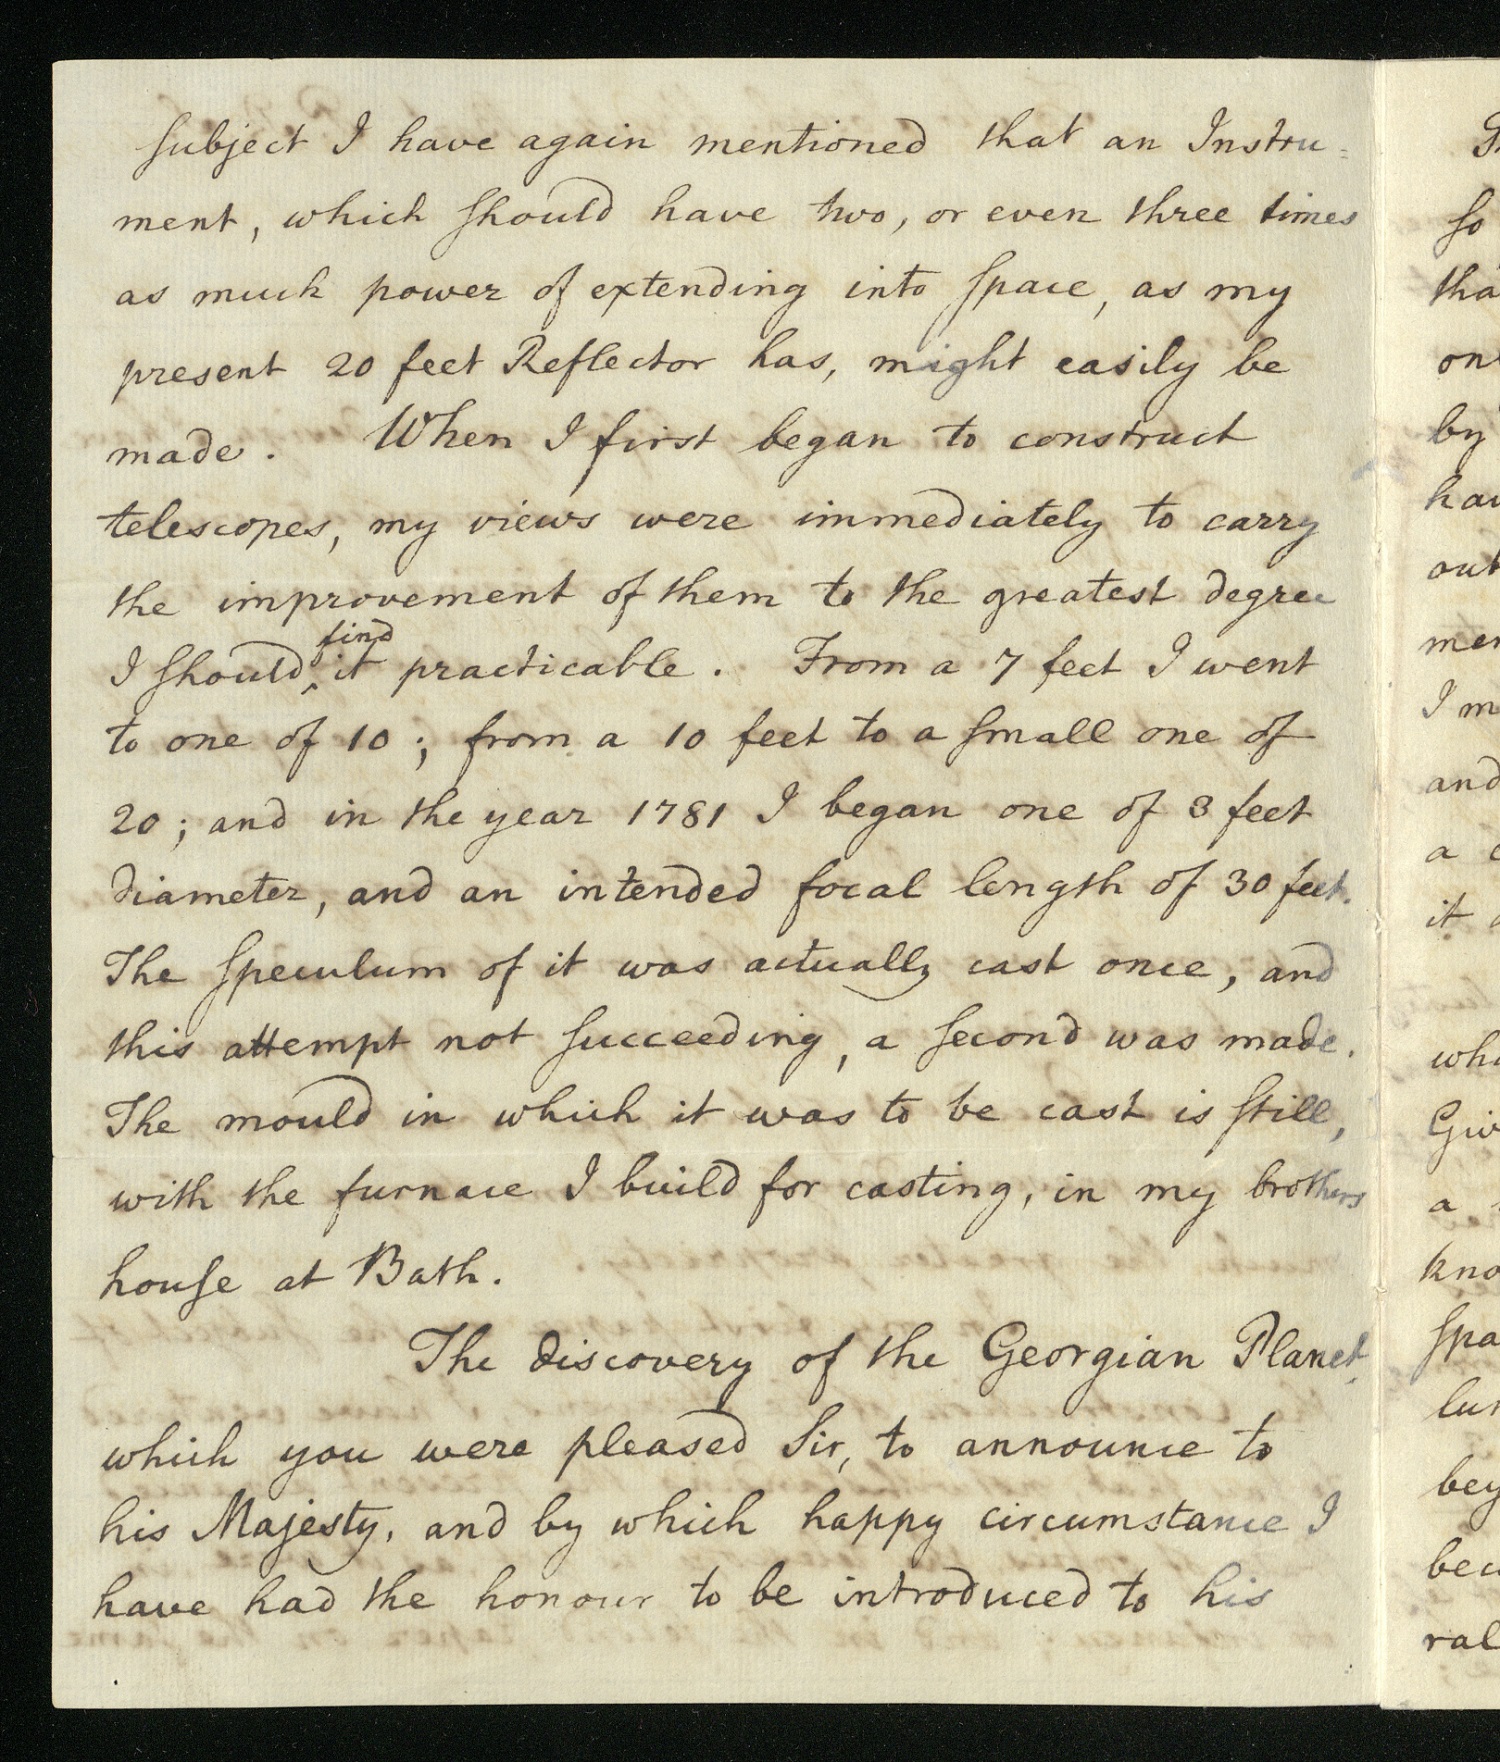 Letter from William Herschel to Sir Joseph Banks, with an estimate of the expenses required to build an enlarged telescope, page 2